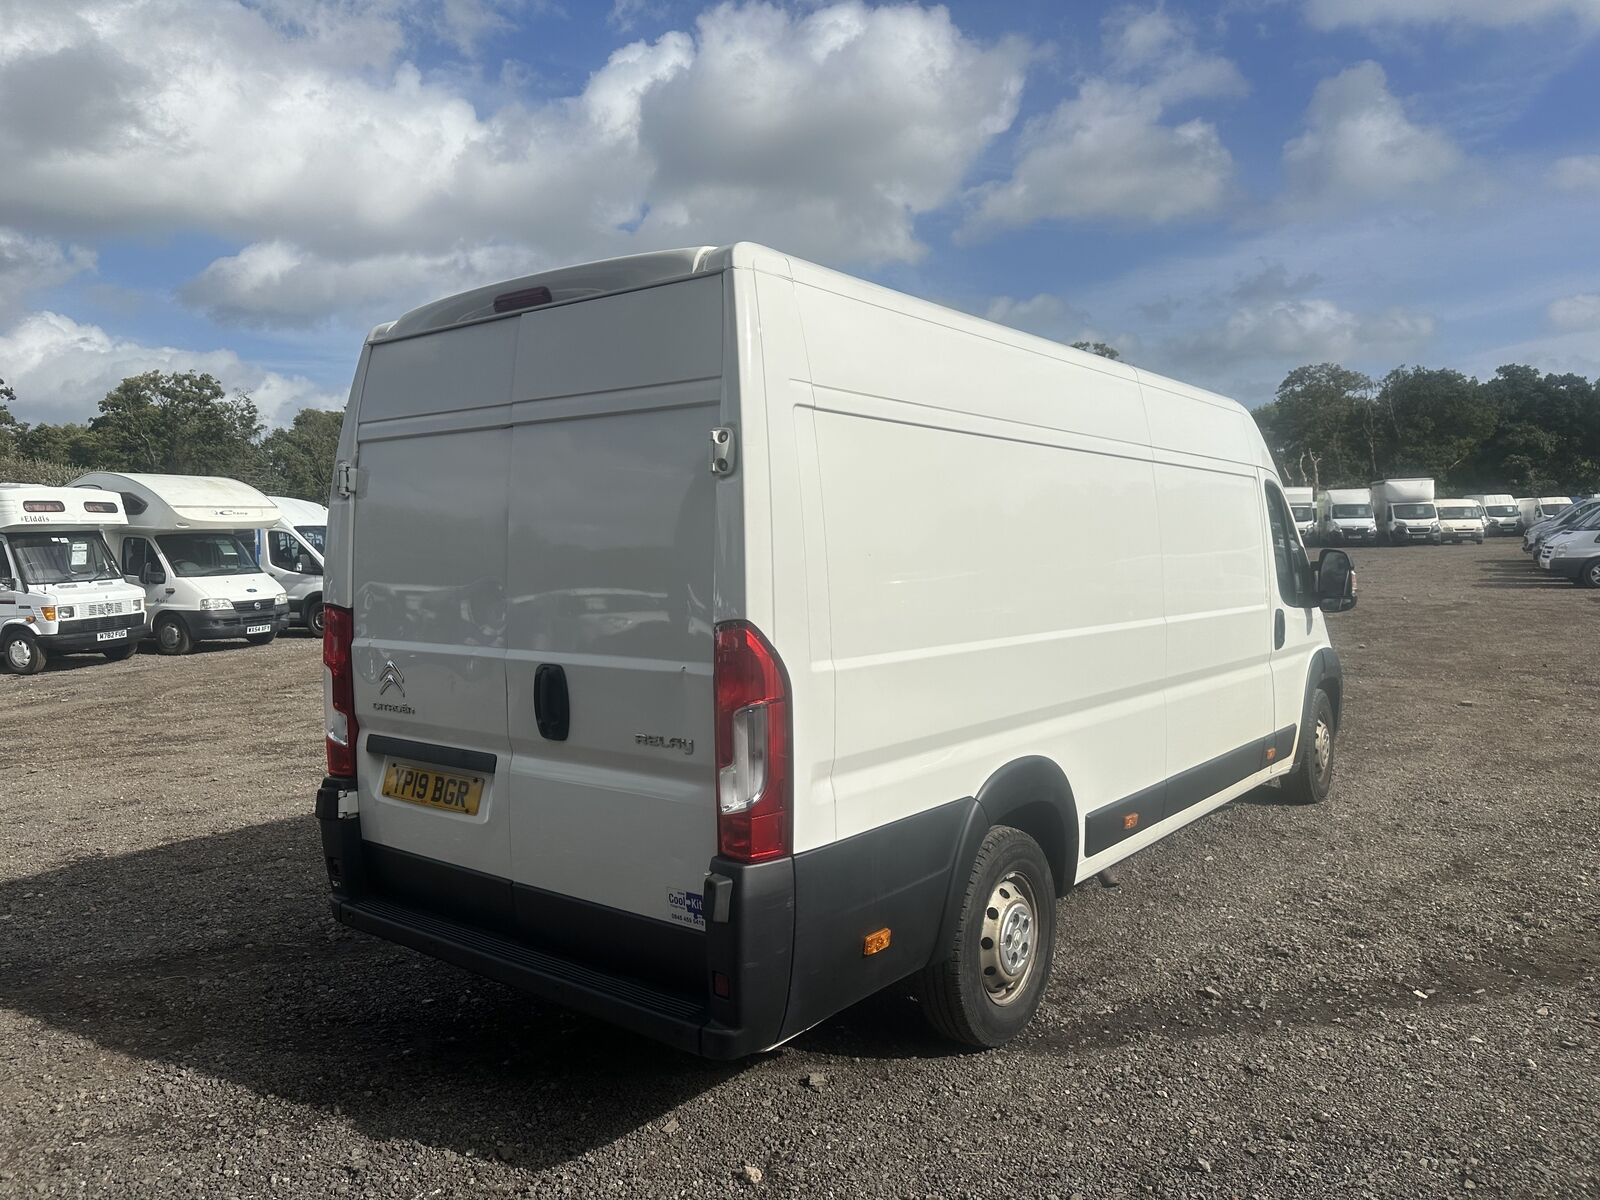 Bid on 2019 CITROEN RELAY 140PS CAMPER: WELL-MAINTAINED WORKHORSE- Buy &amp; Sell on Auction with EAMA Group